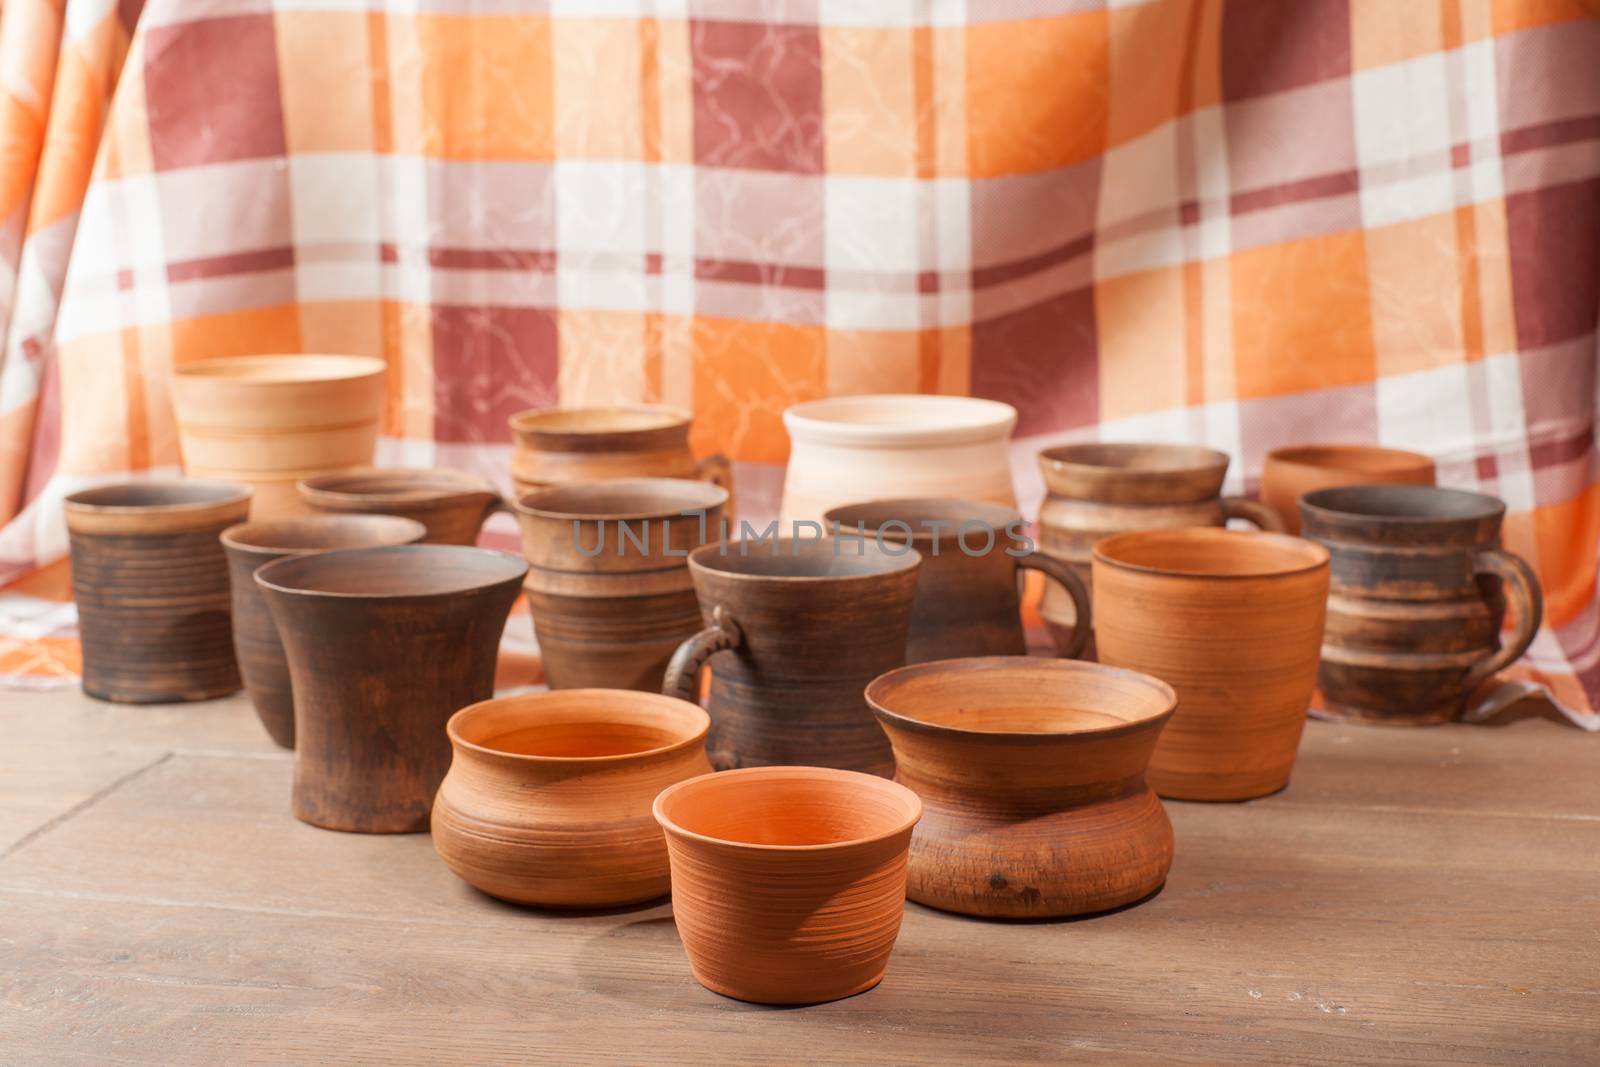 Set of traditional handcrafted mugs on the wooden table